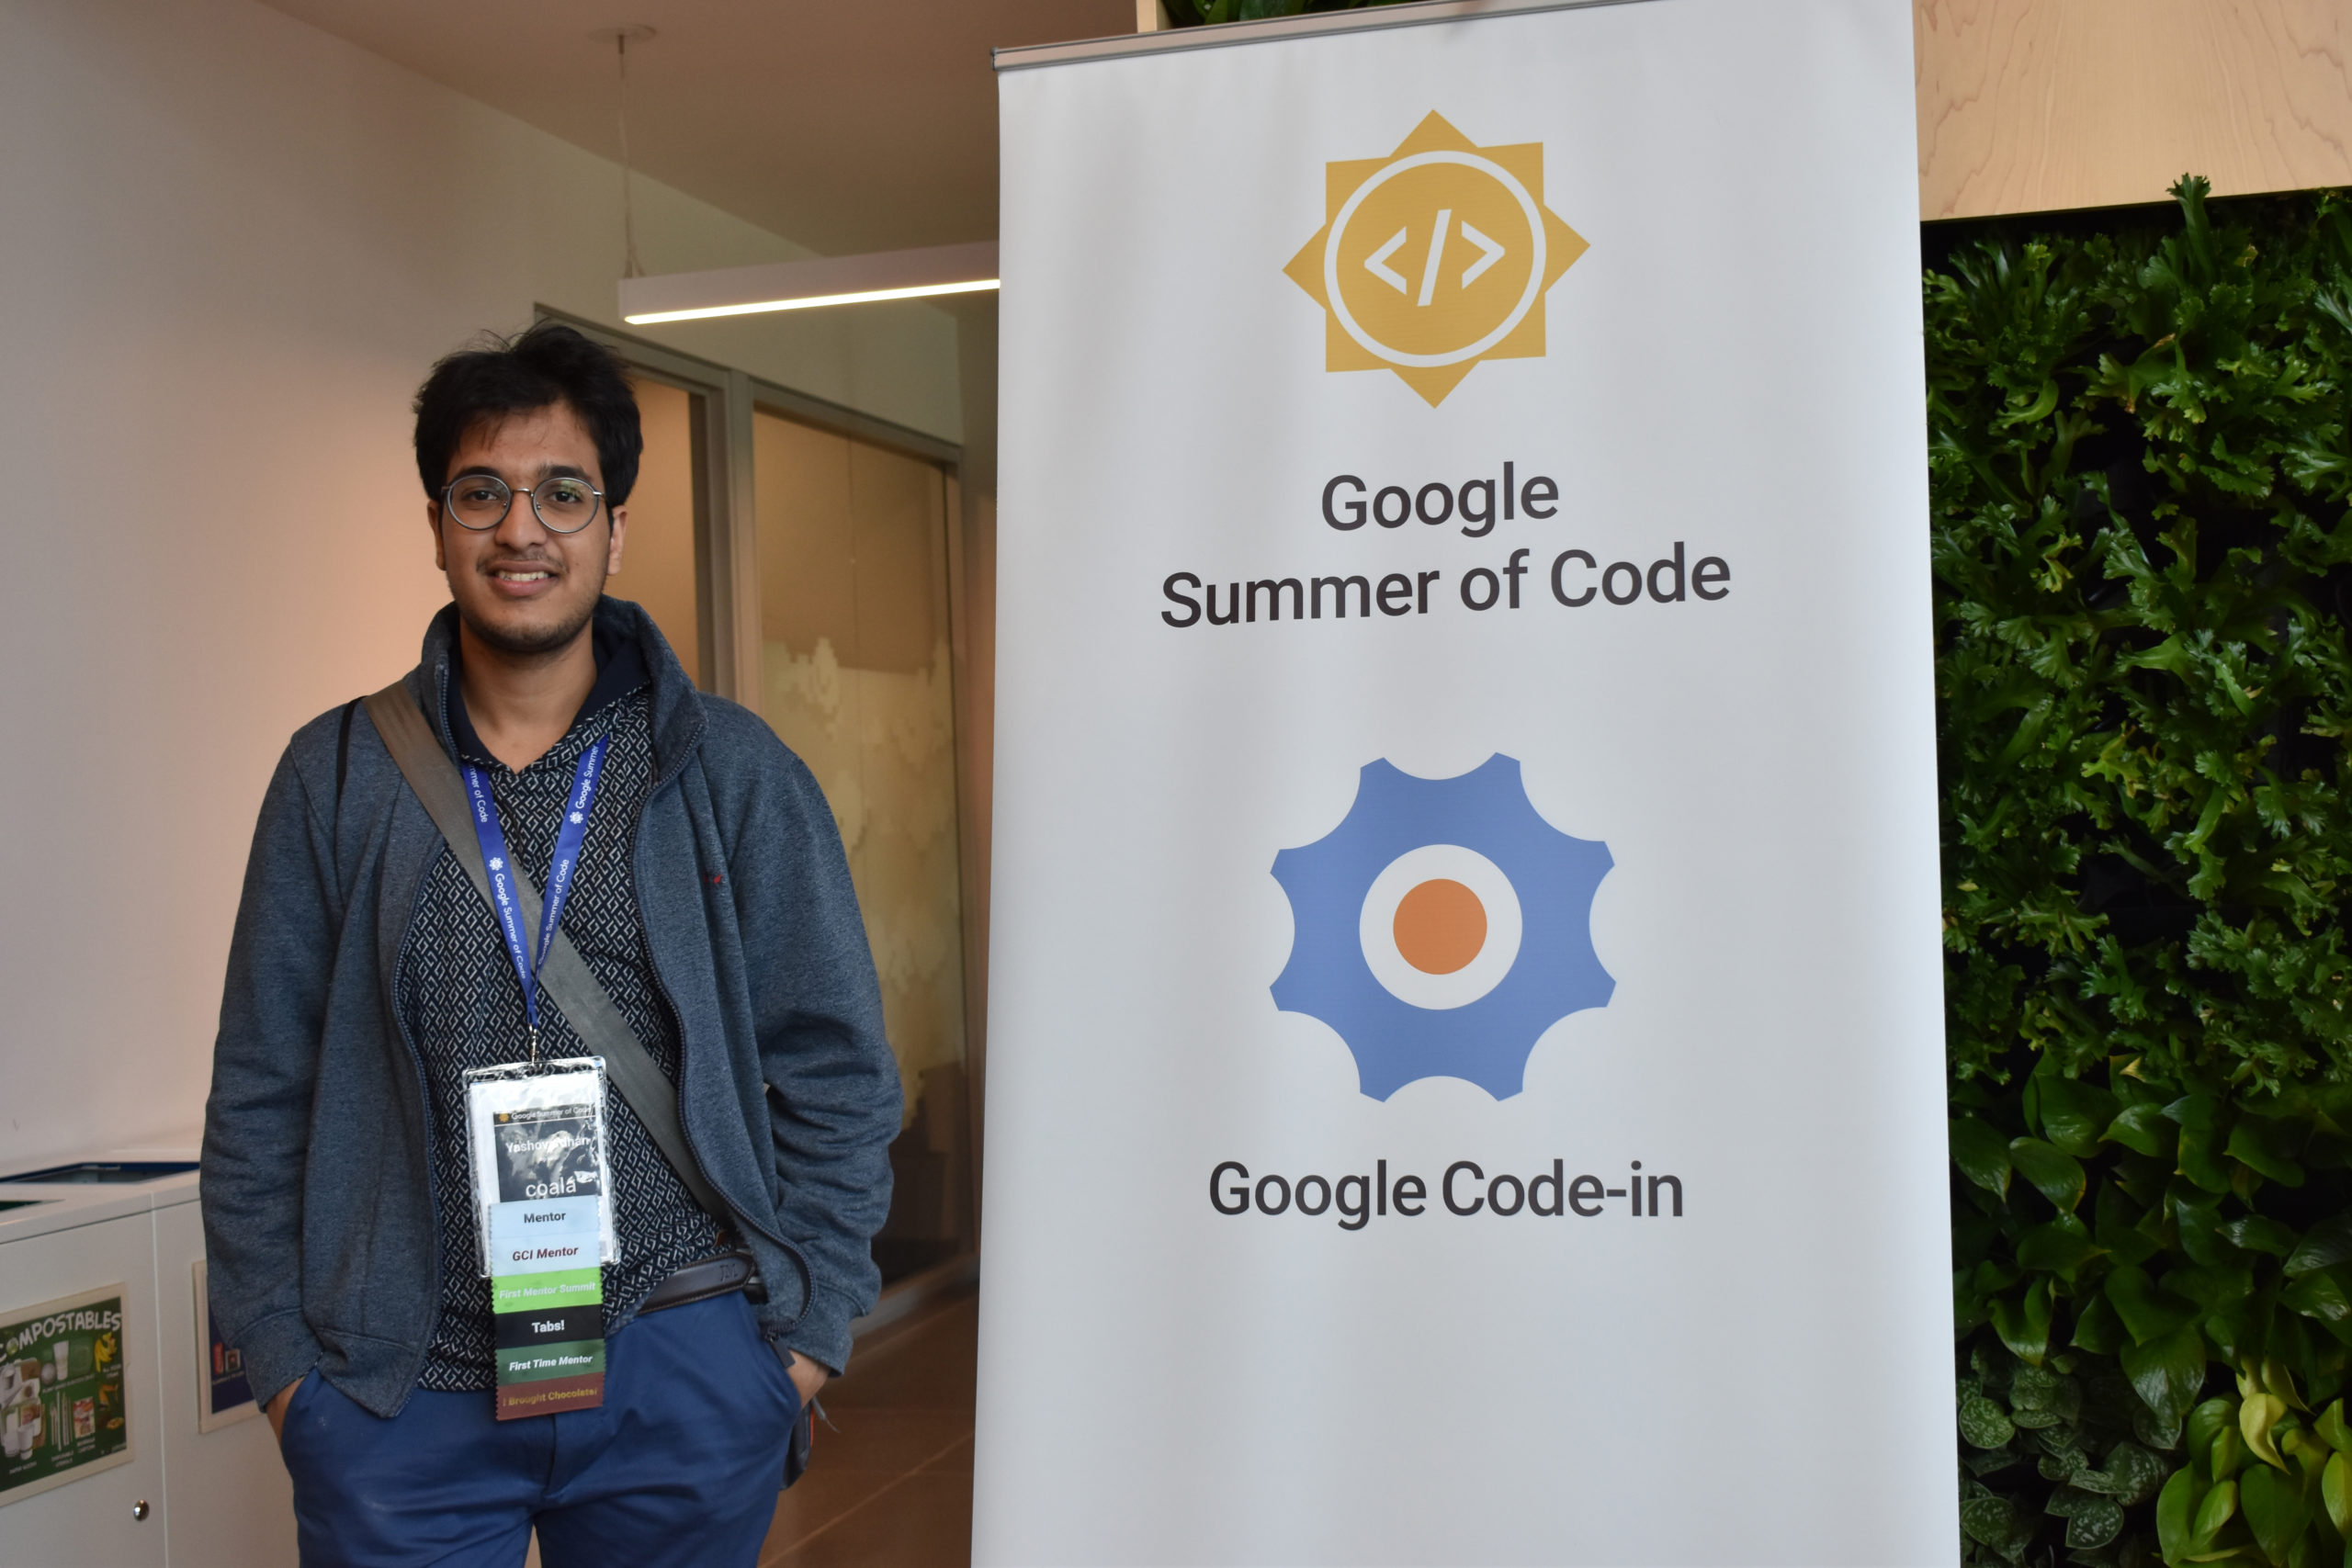 At the Google Summer of Code Mentor's Summit in Sunnyvale, California